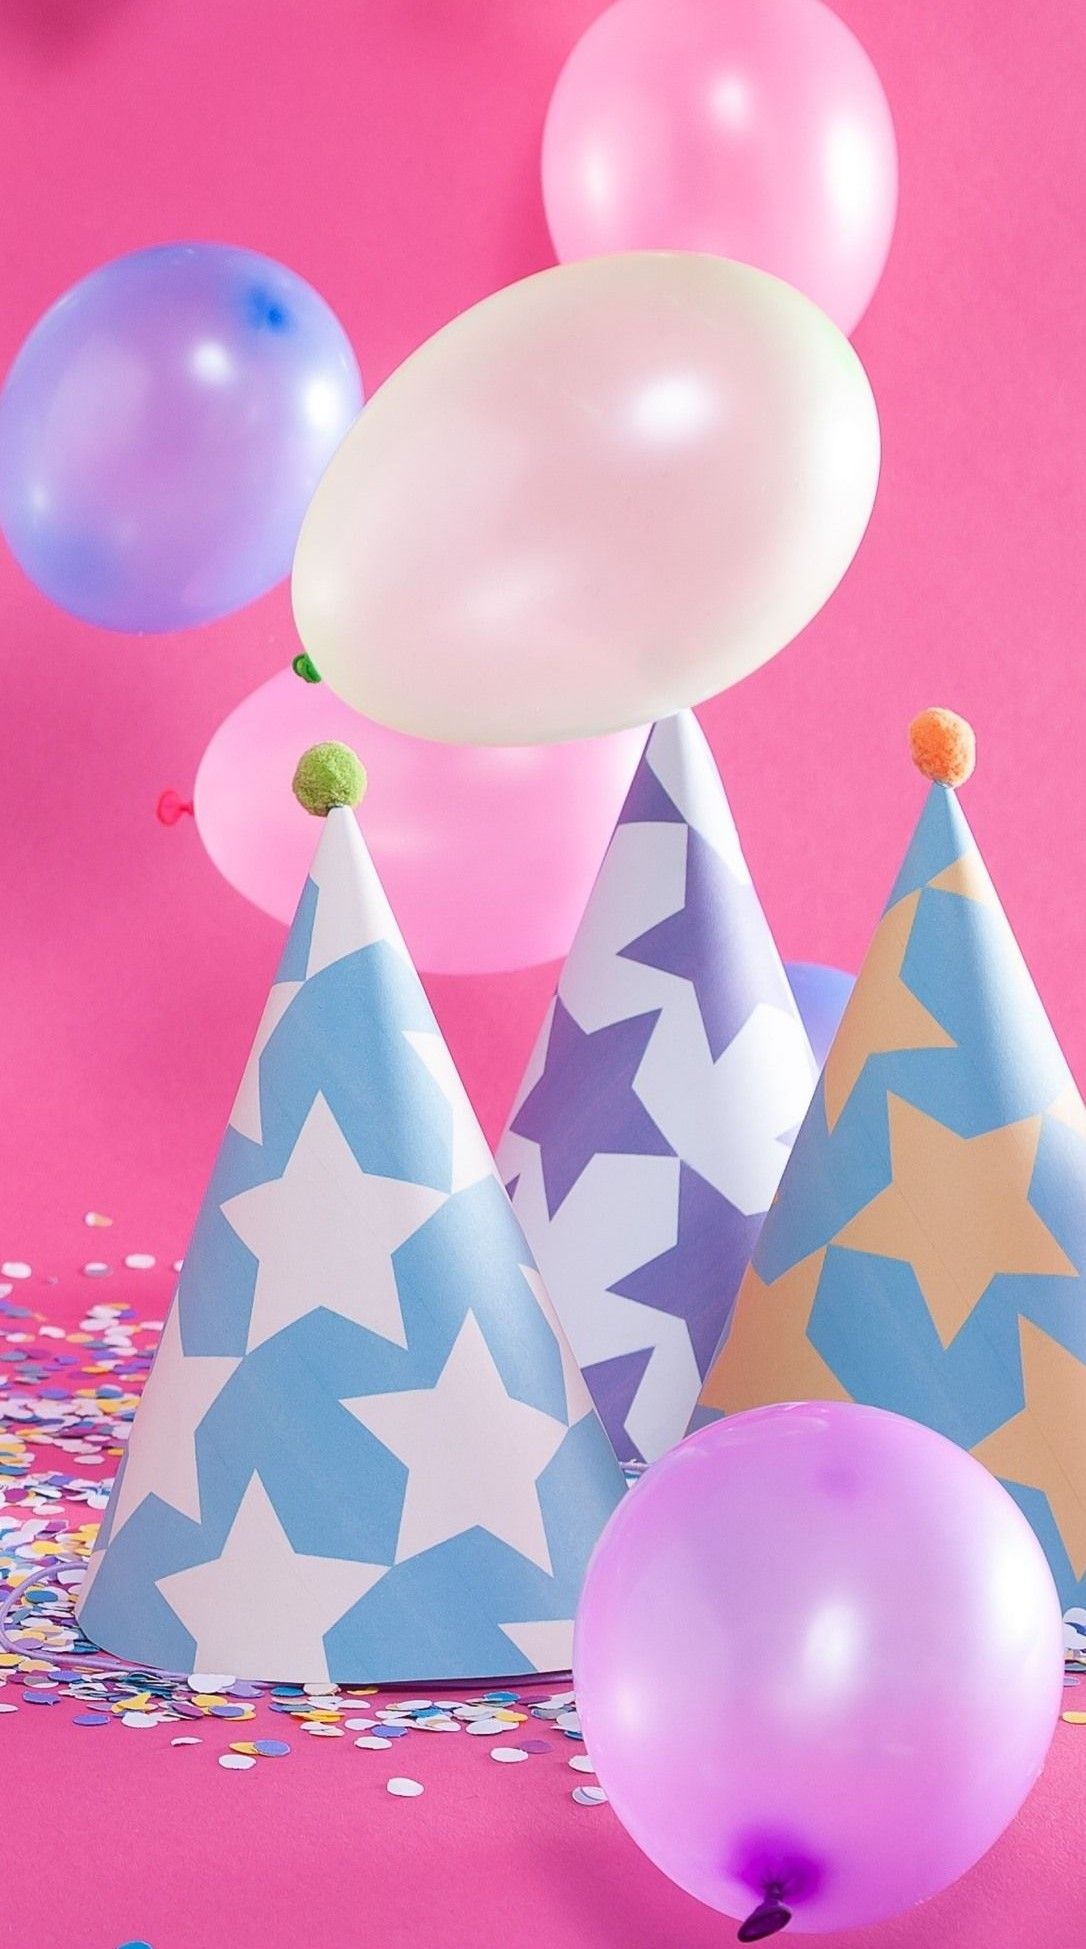 Three party hats with balloons and confetti on a pink background - Balloons, birthday